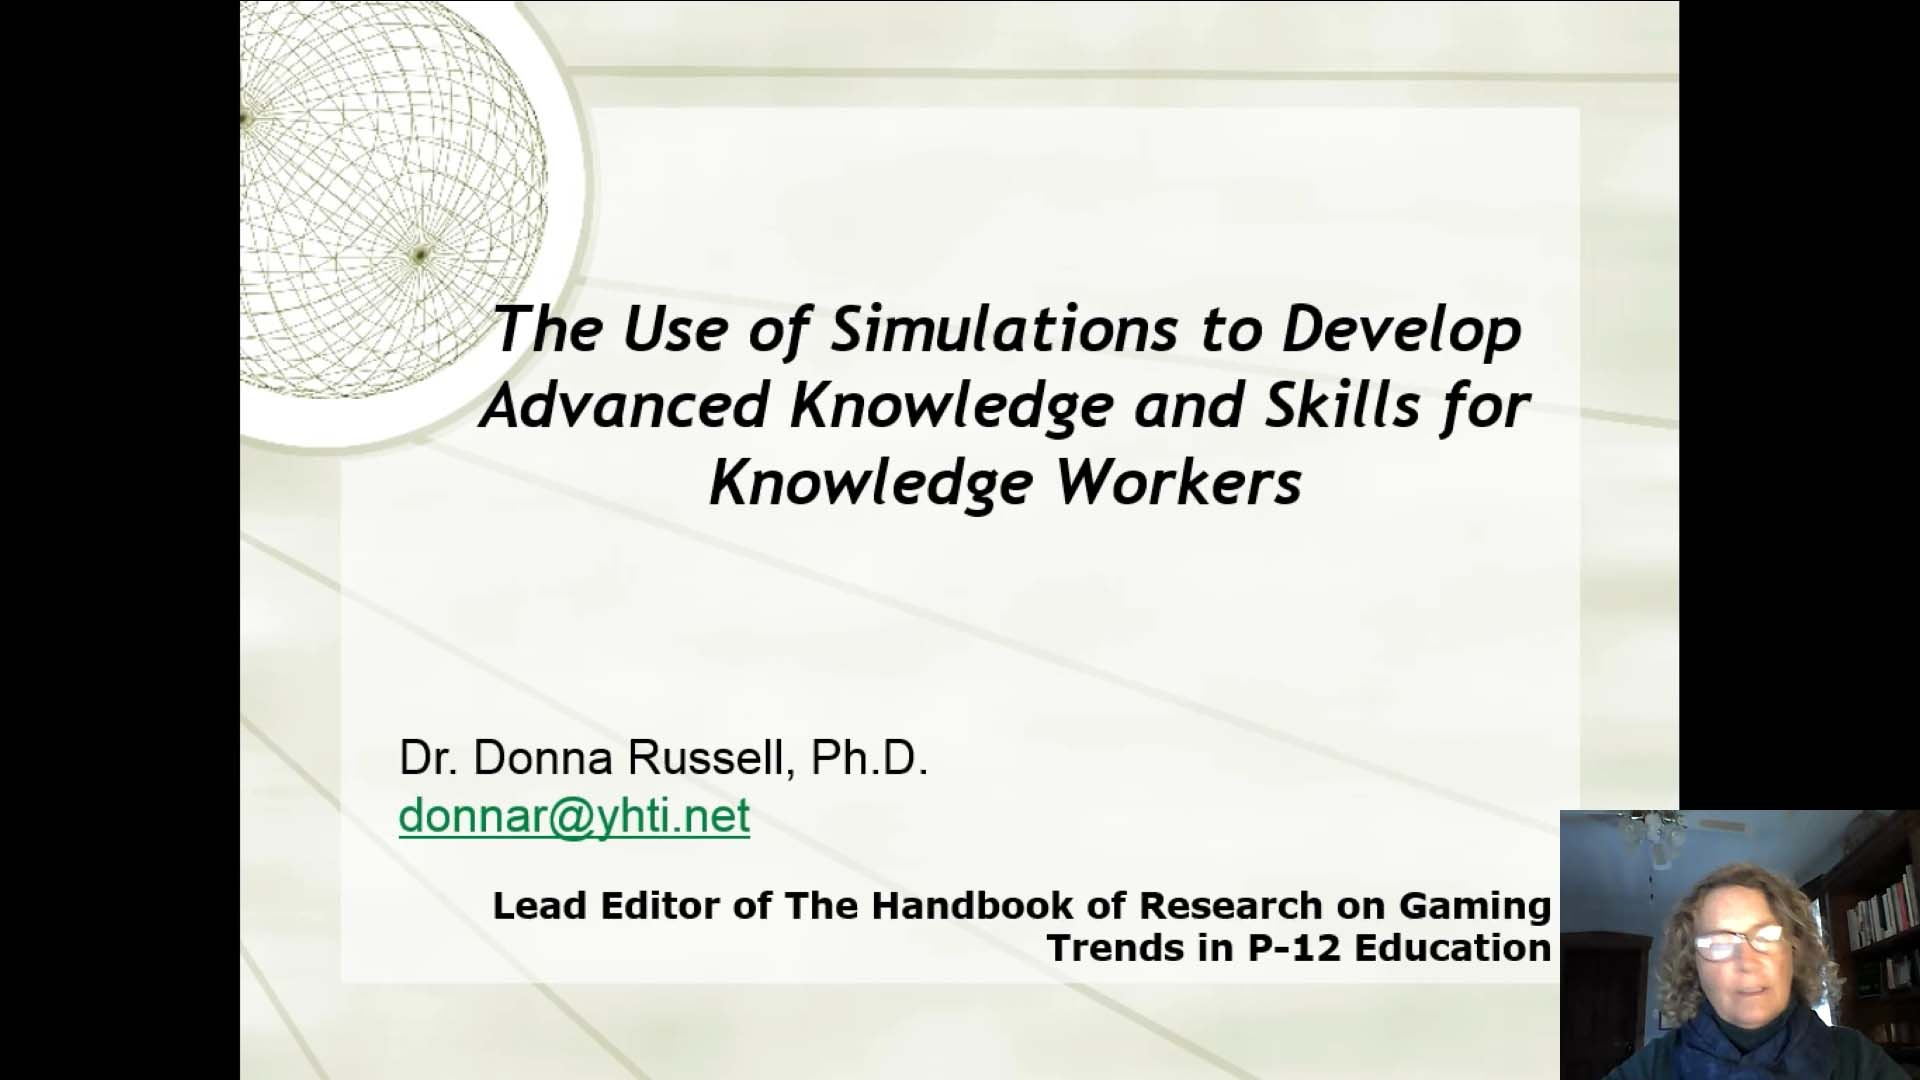 Simulations as an Educational Resource for Knowledge Workers